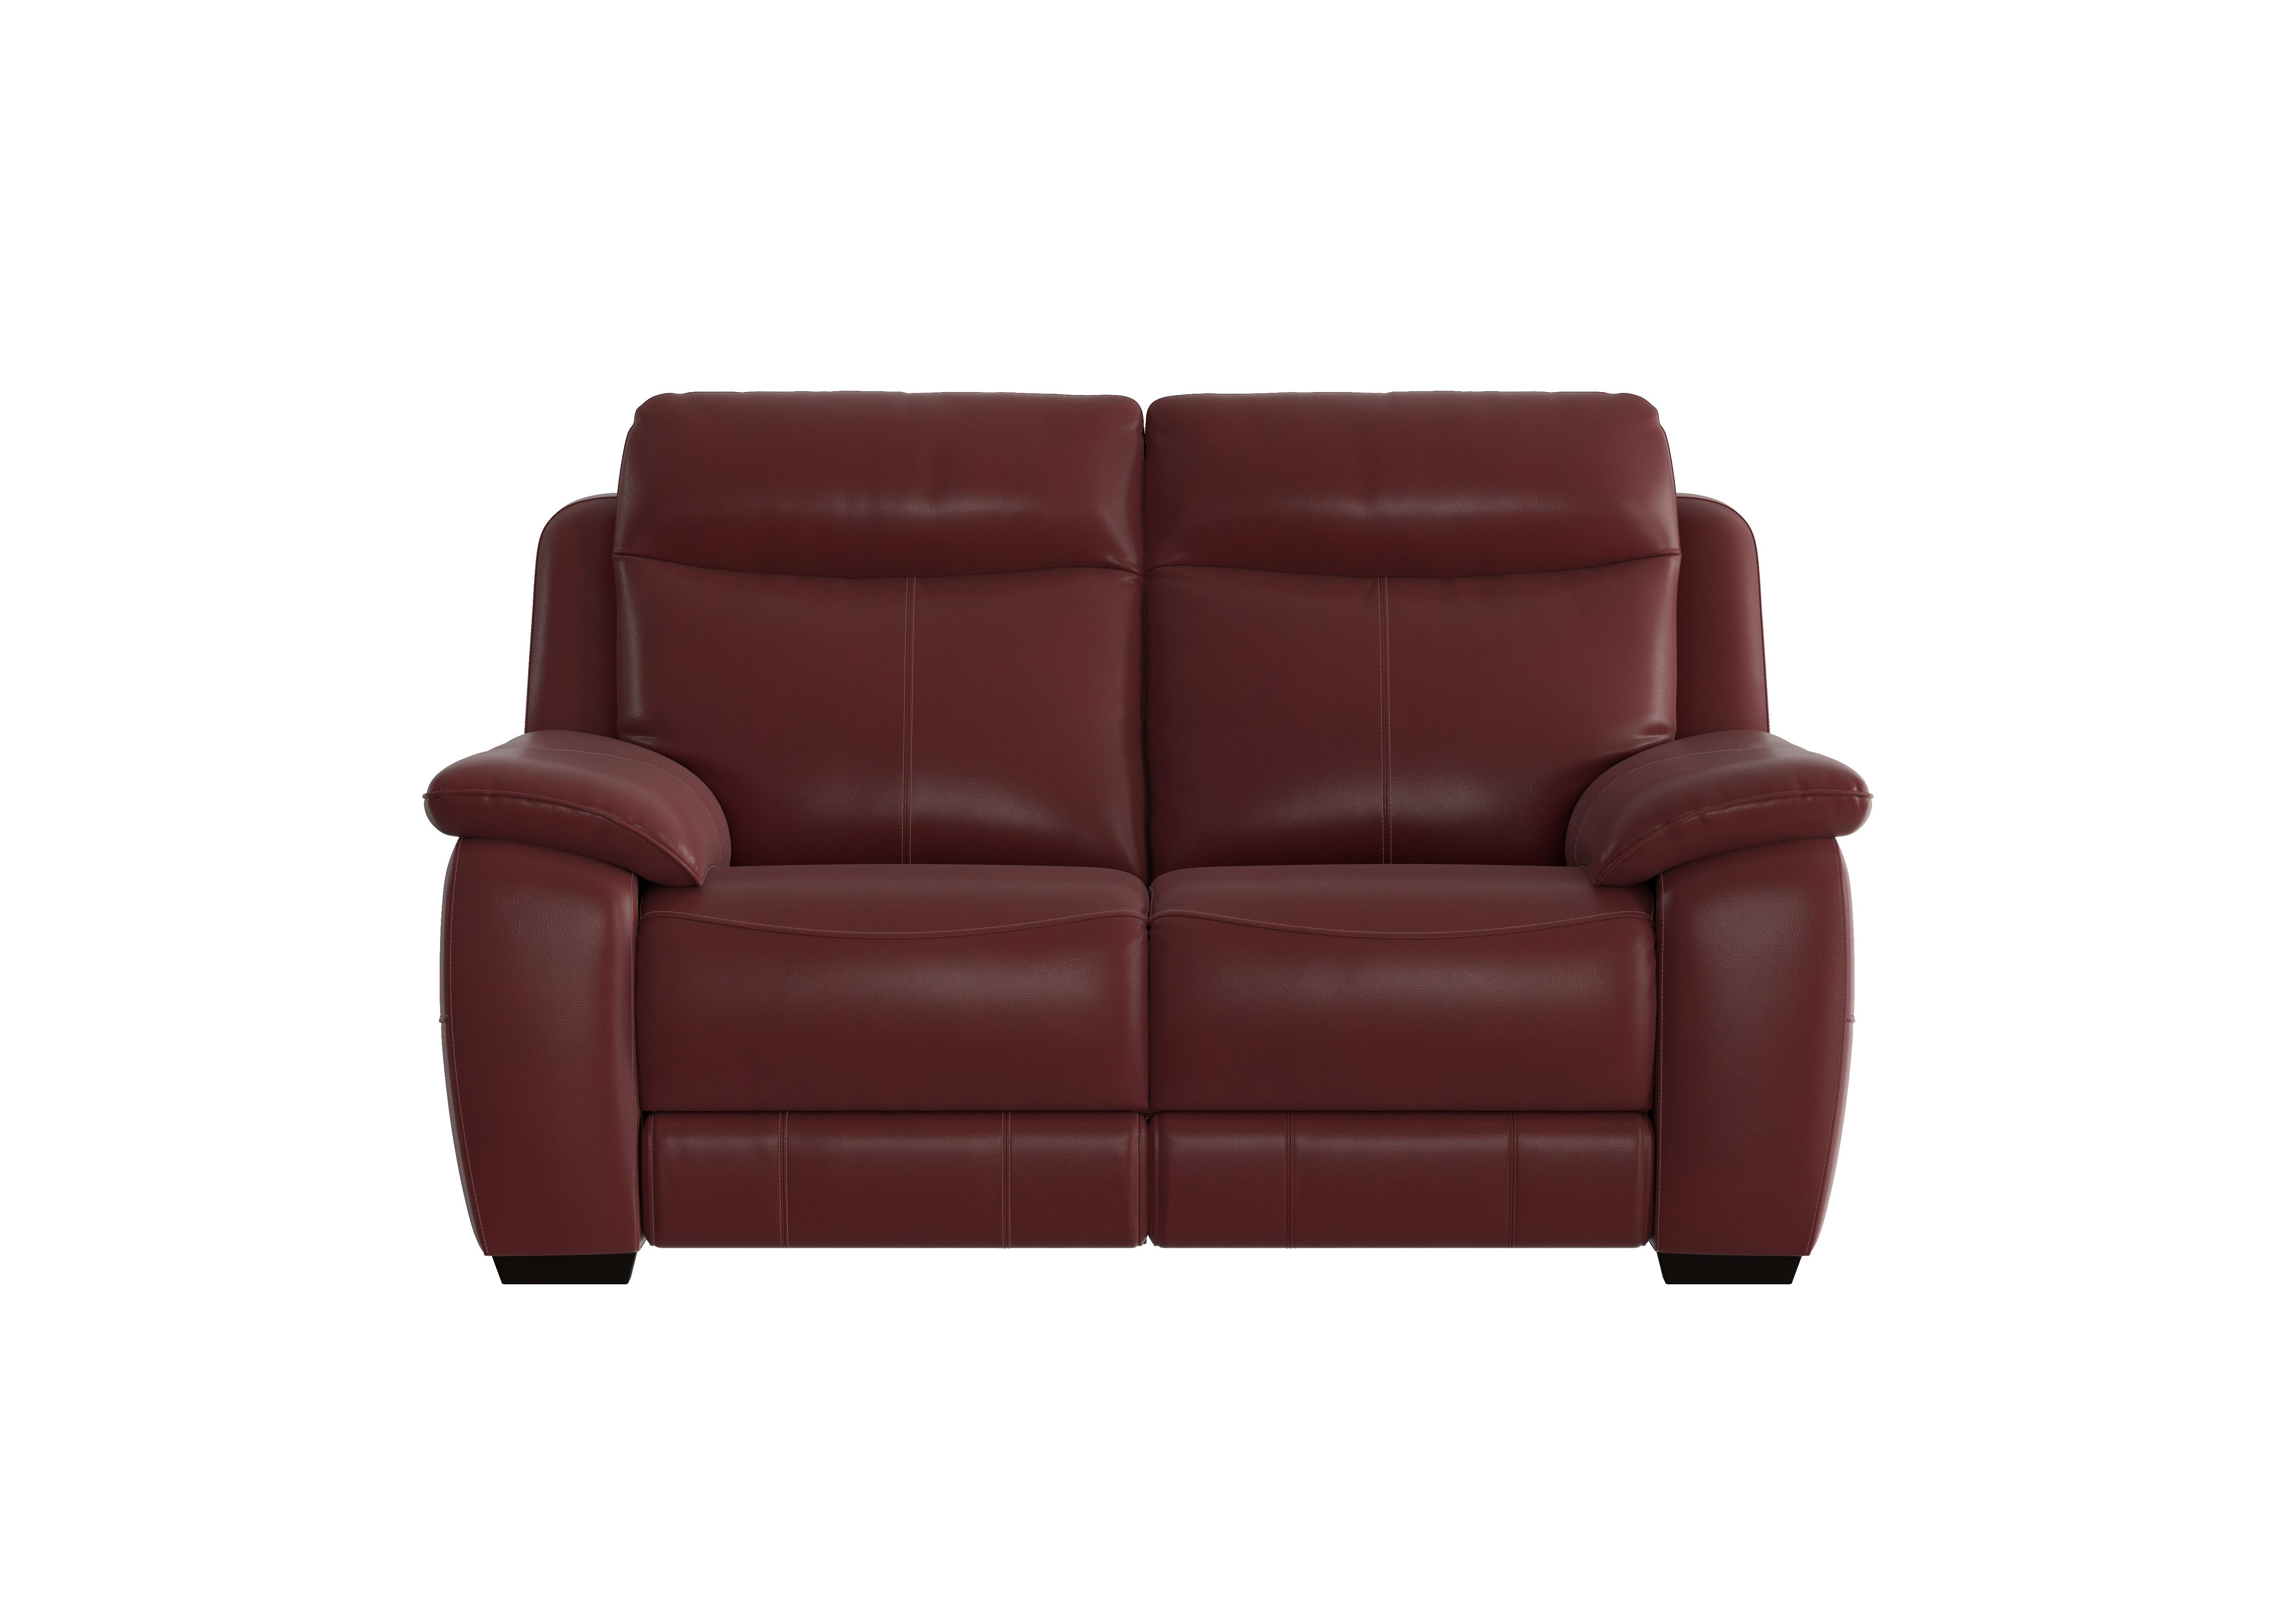 Starlight Express 2 Seater Leather Recliner Sofa with Power Headrests in Bv-035c Deep Red on Furniture Village